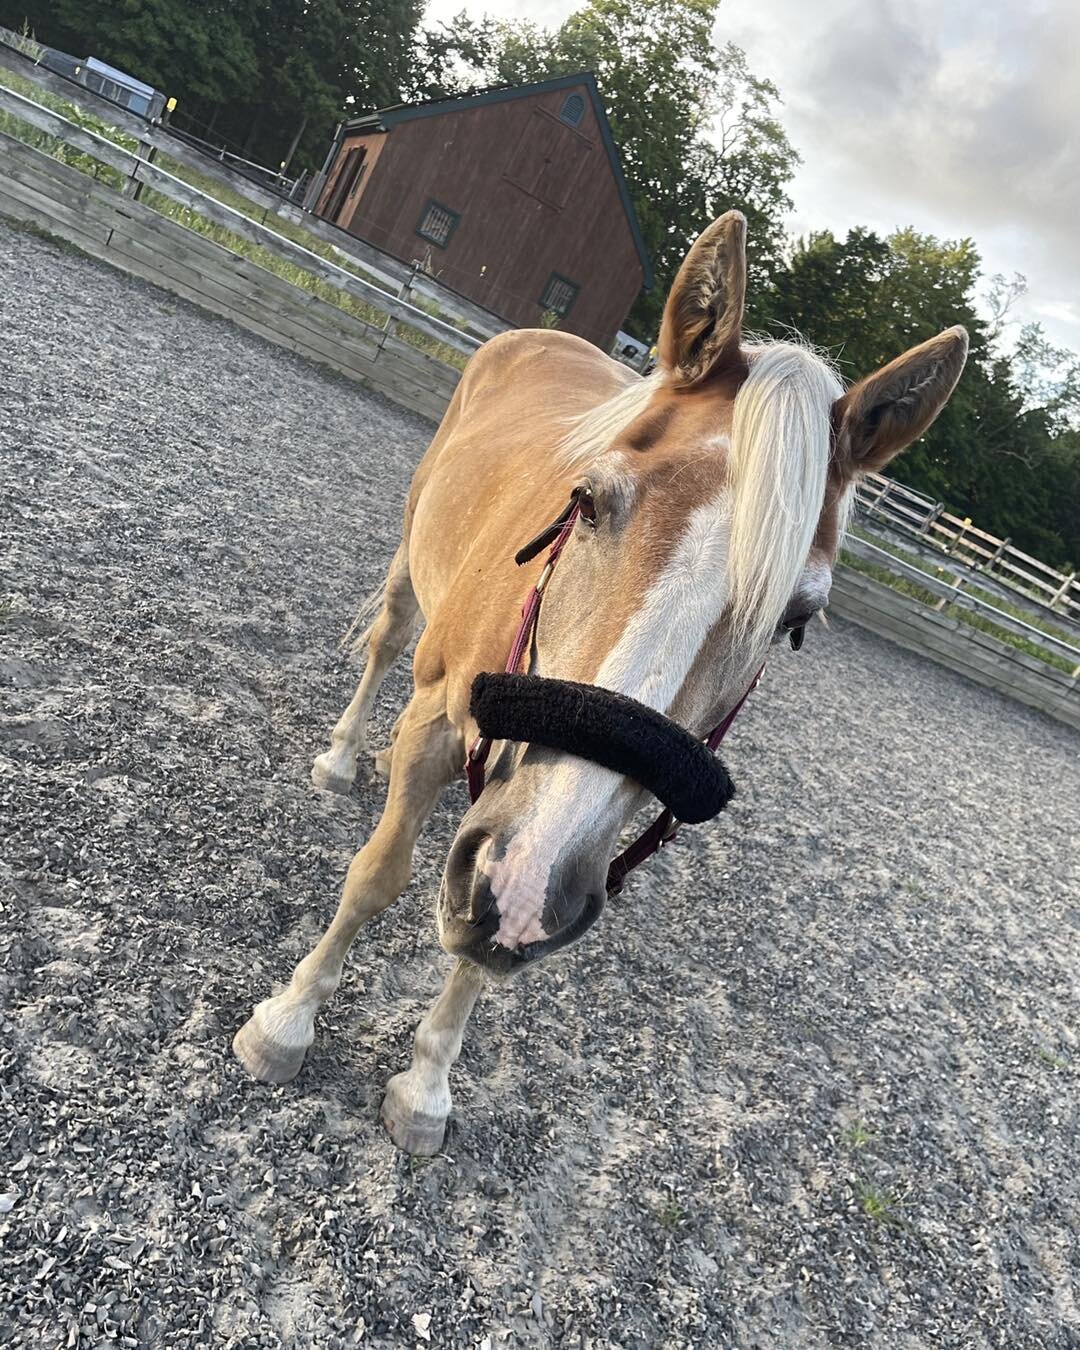 It is another Teamwork Tuesday! This patient saw Drs. Javsicas, Pasch and Deibel to get to the bottom of her health issues.

A 16 year old Haflinger mare, presented to RE for a workup of a six month history of chronic colic. A previous gastroscopy re